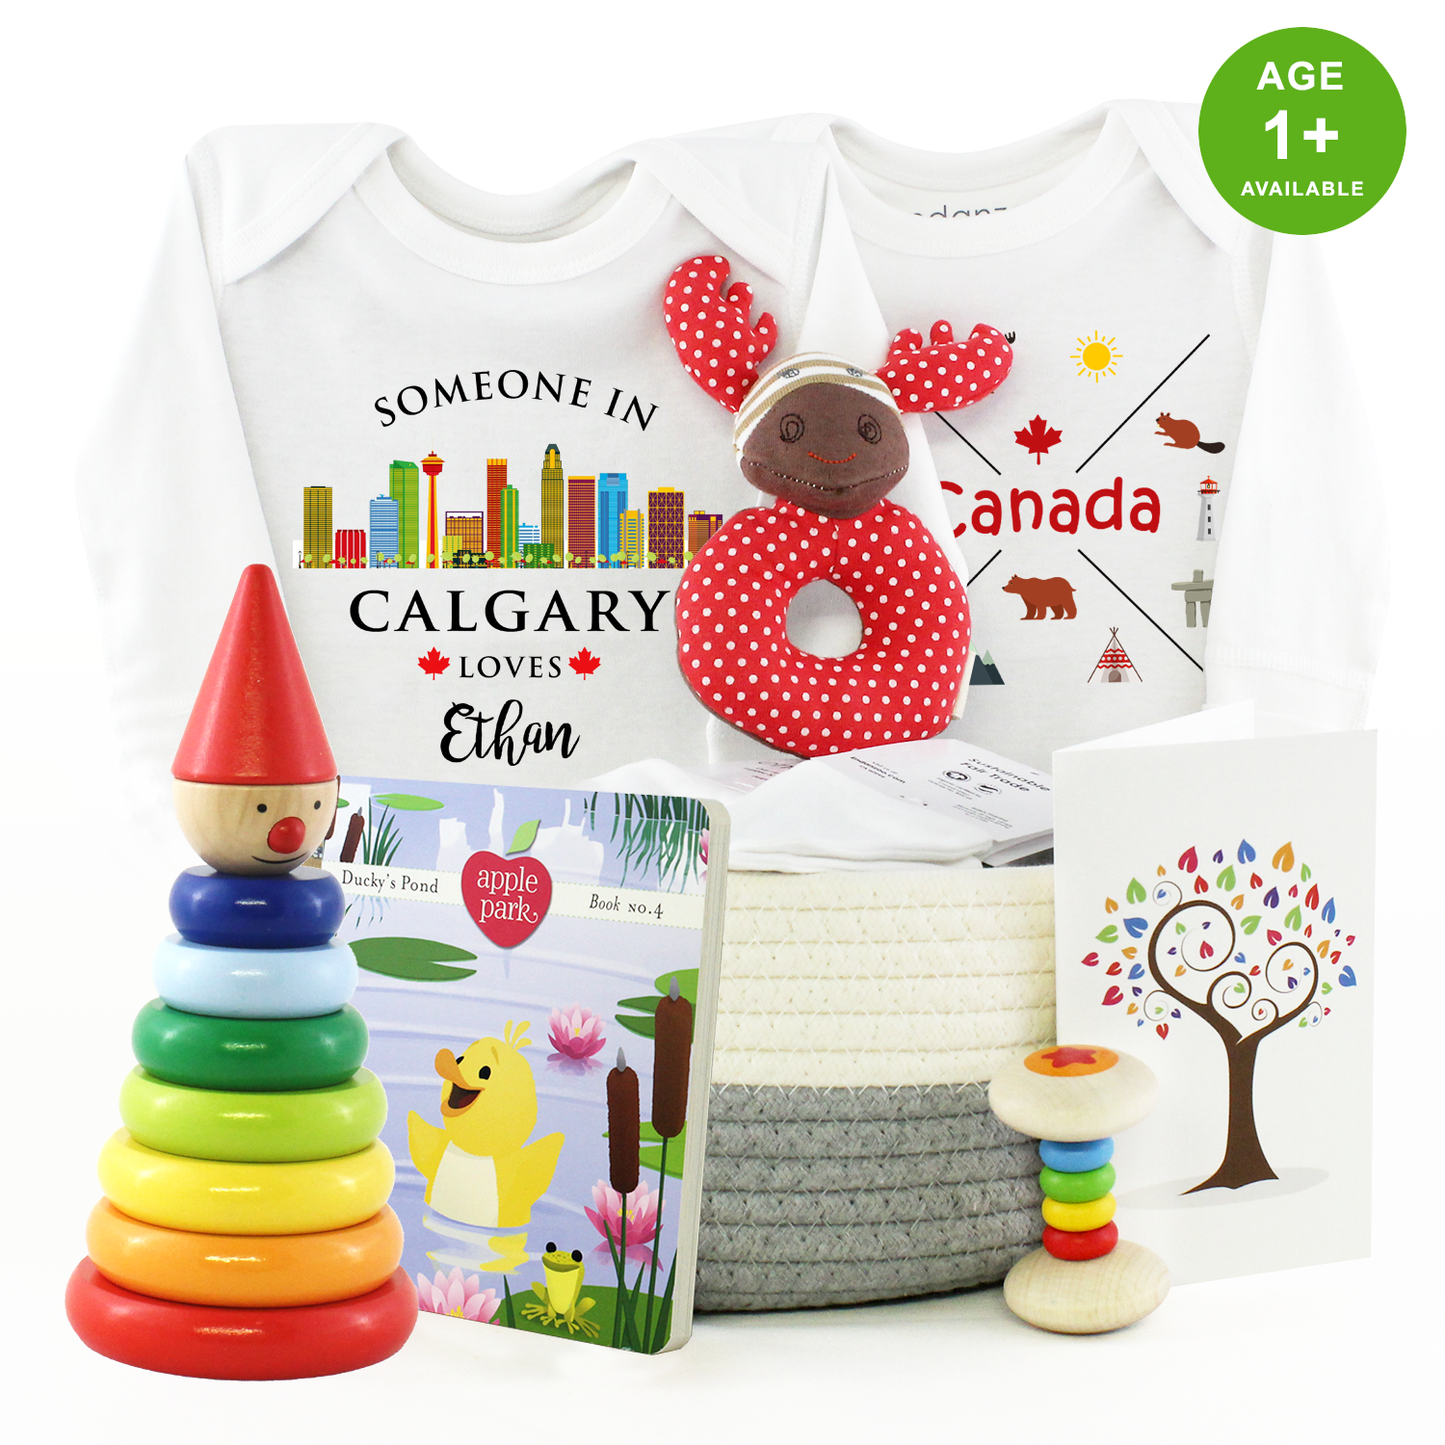 Zeronto Baby Gift Basket - Someone in Calgary Loves You